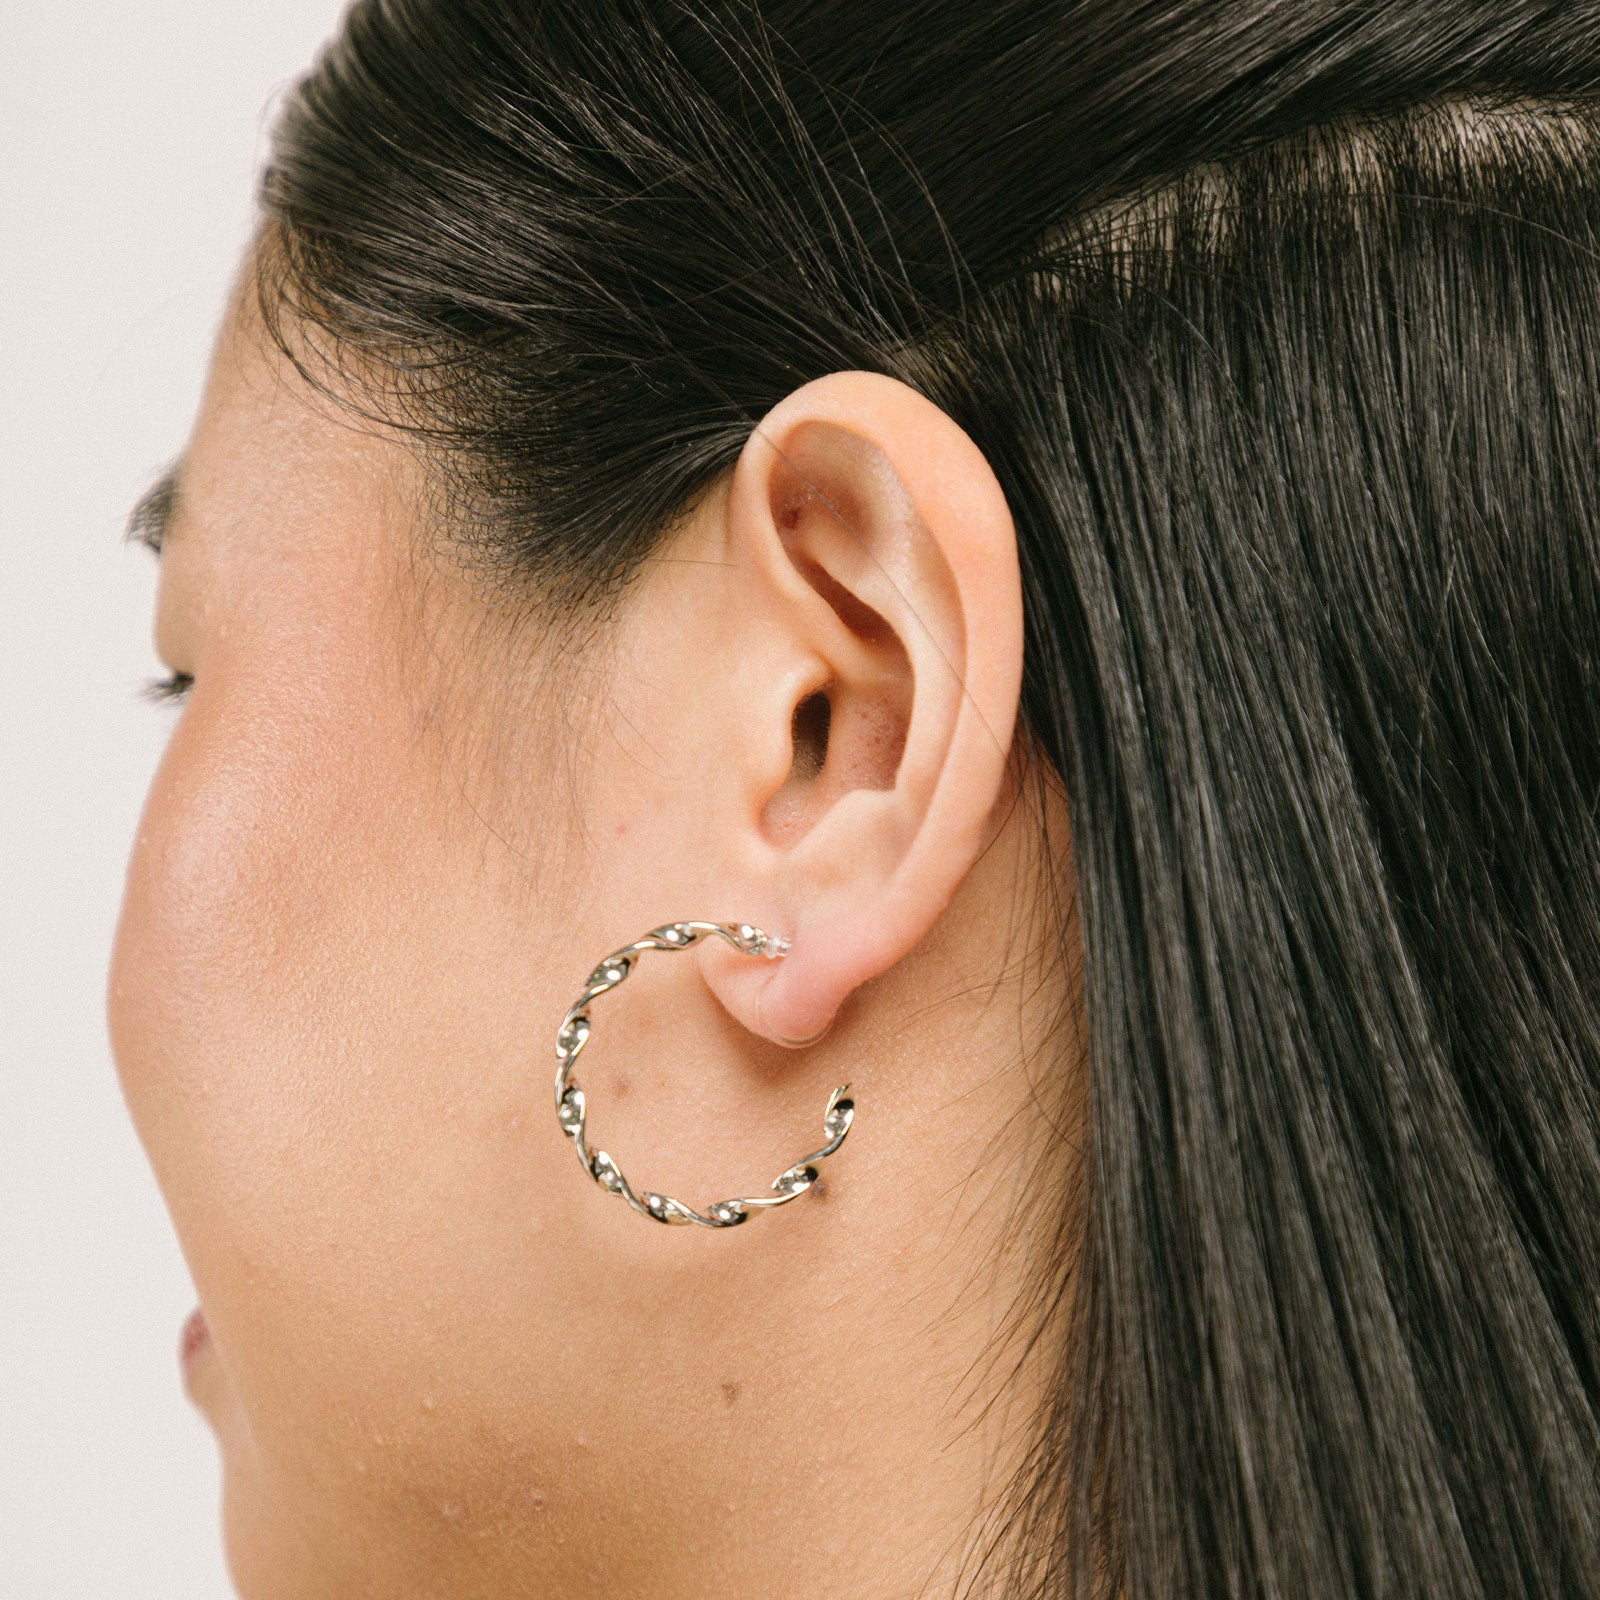 A model wearing the Silver Wave Hoop Clip-On Earrings are perfect for all ear types. Whether you have thick or large ears, or sensitive, small or thin ears, these earrings offer a medium-secure hold and can be comfortably worn for 8-12 hours. The earrings are made of silver-tone metal alloy and offer no ability to adjust - each purchase is for one pair. You can also find these earrings in a gold version.